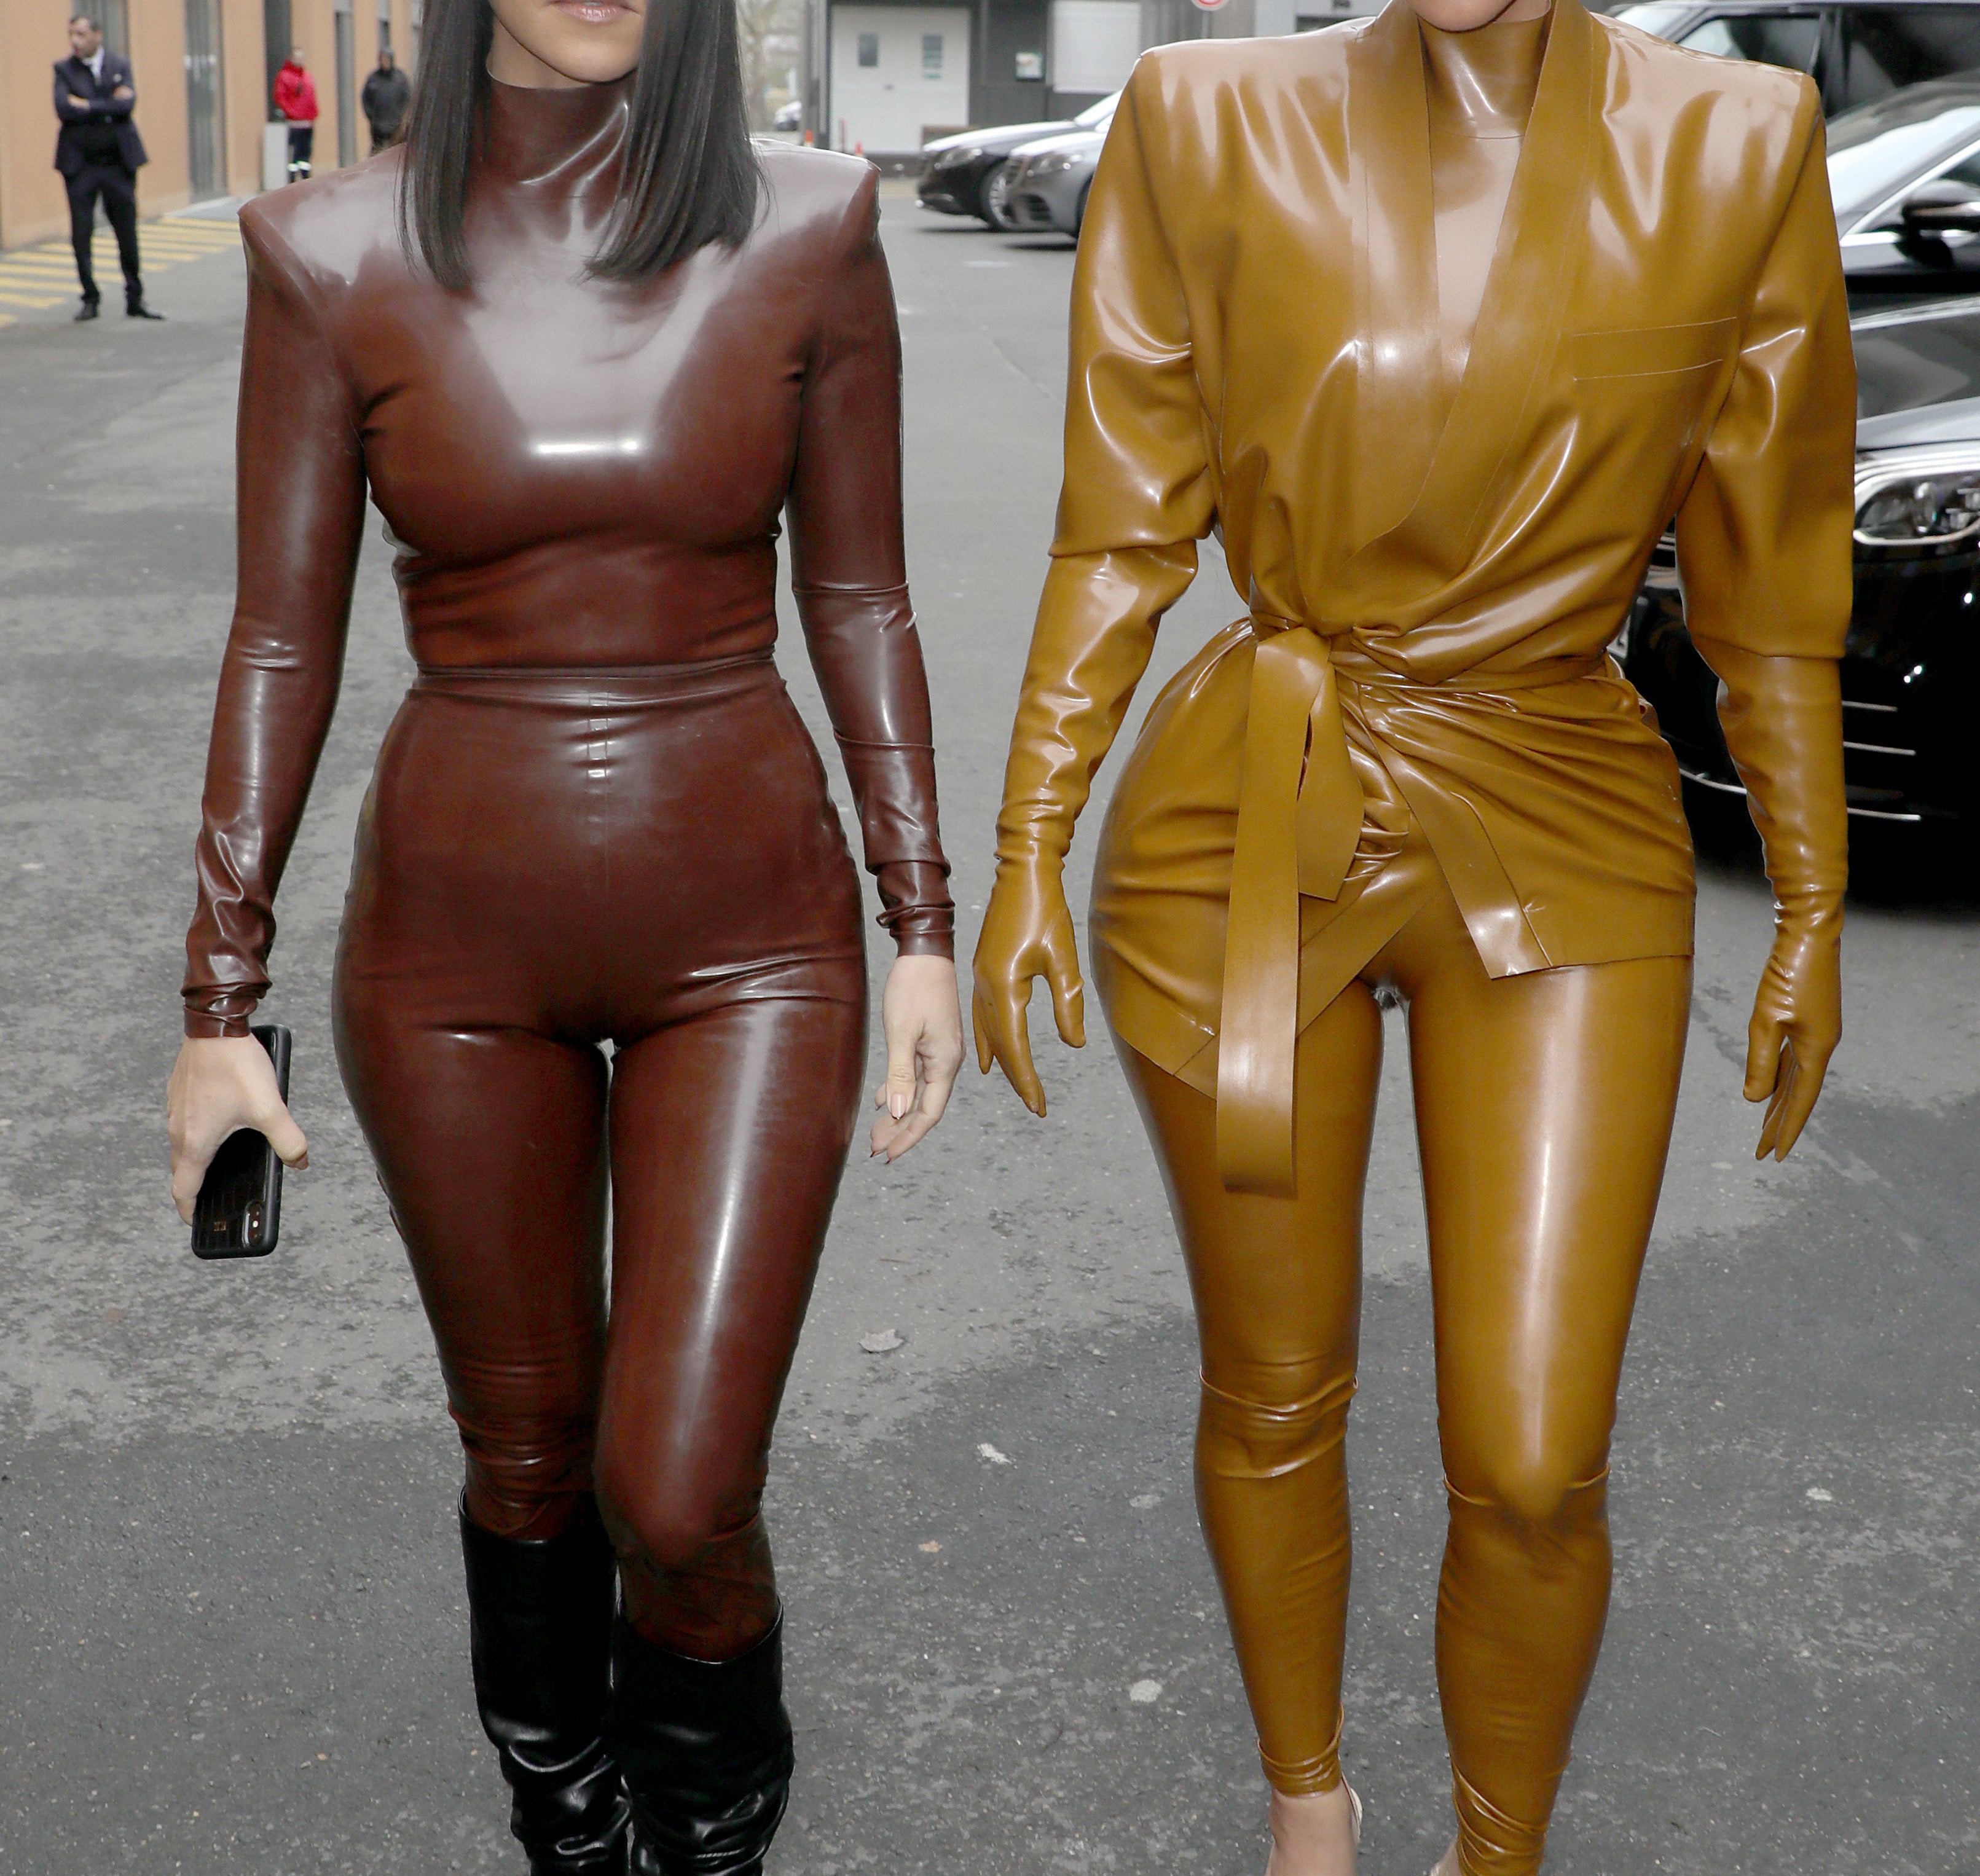 Kourtney and Kim walking on the street and wearing skintight, shiny bodysuit outfits